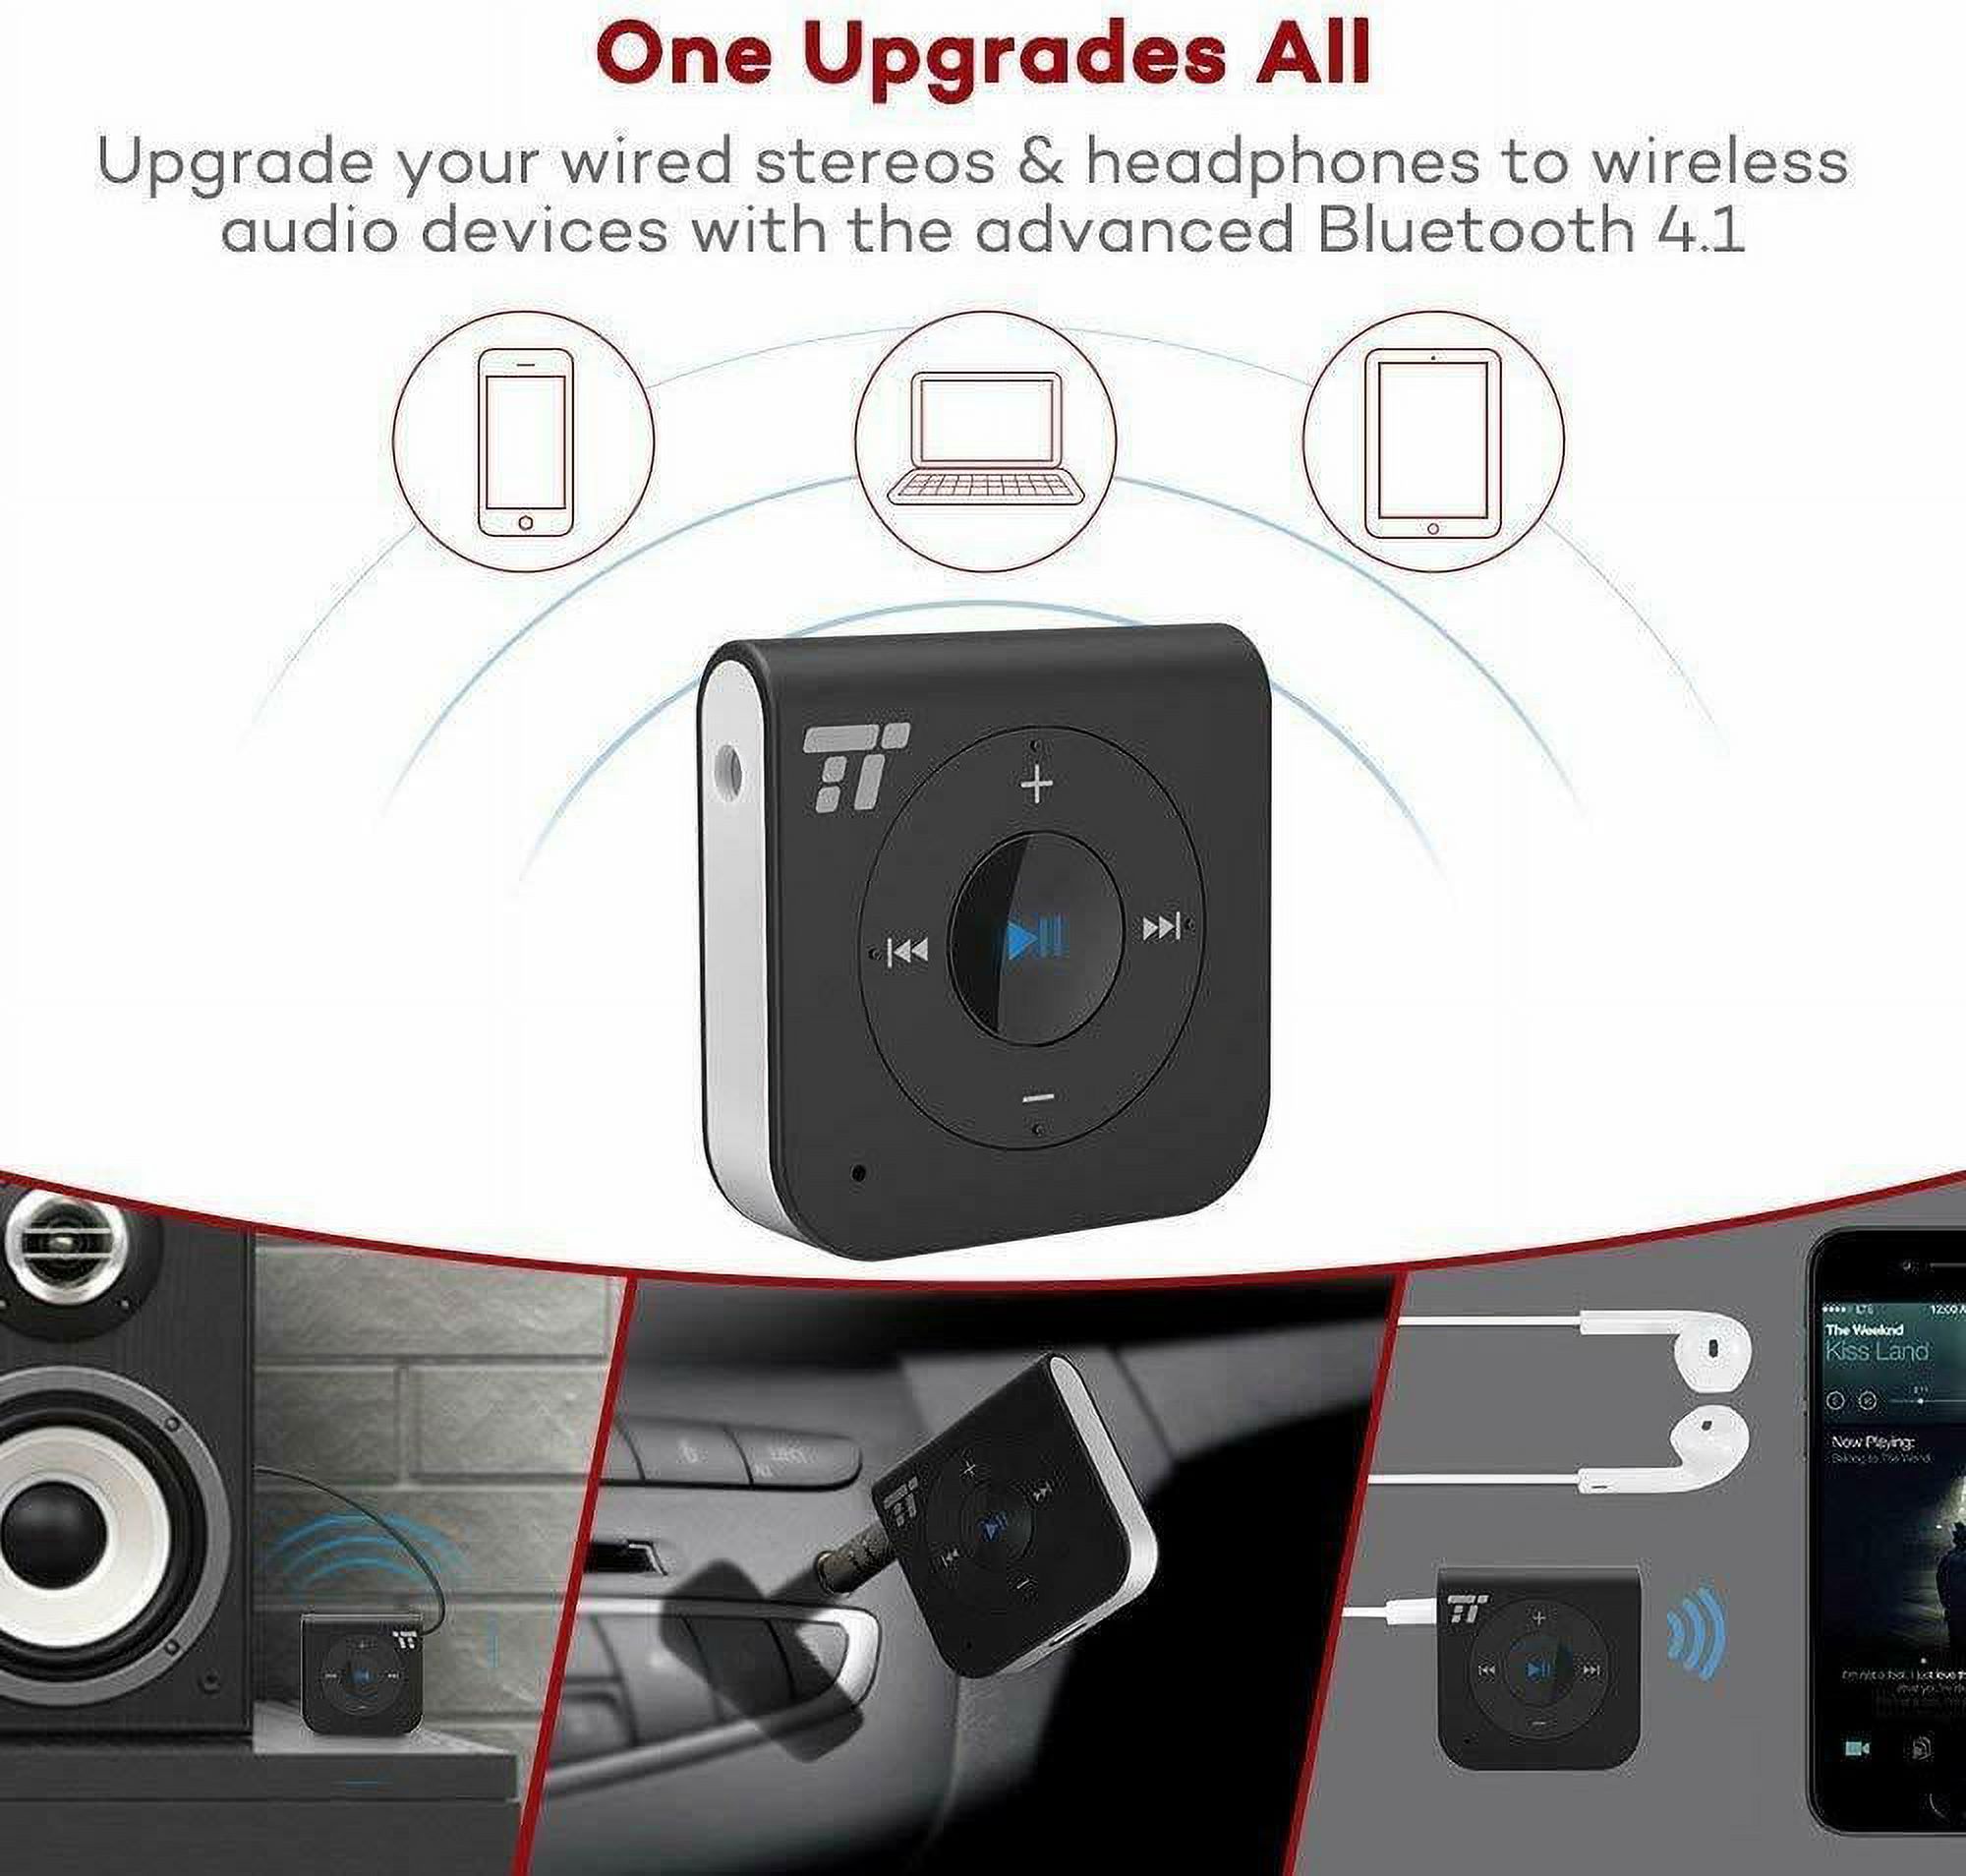 Taotronics Portable 15 Hour Bluetooth Receiver Wireless Car Aux Adapter SB23 - image 2 of 4